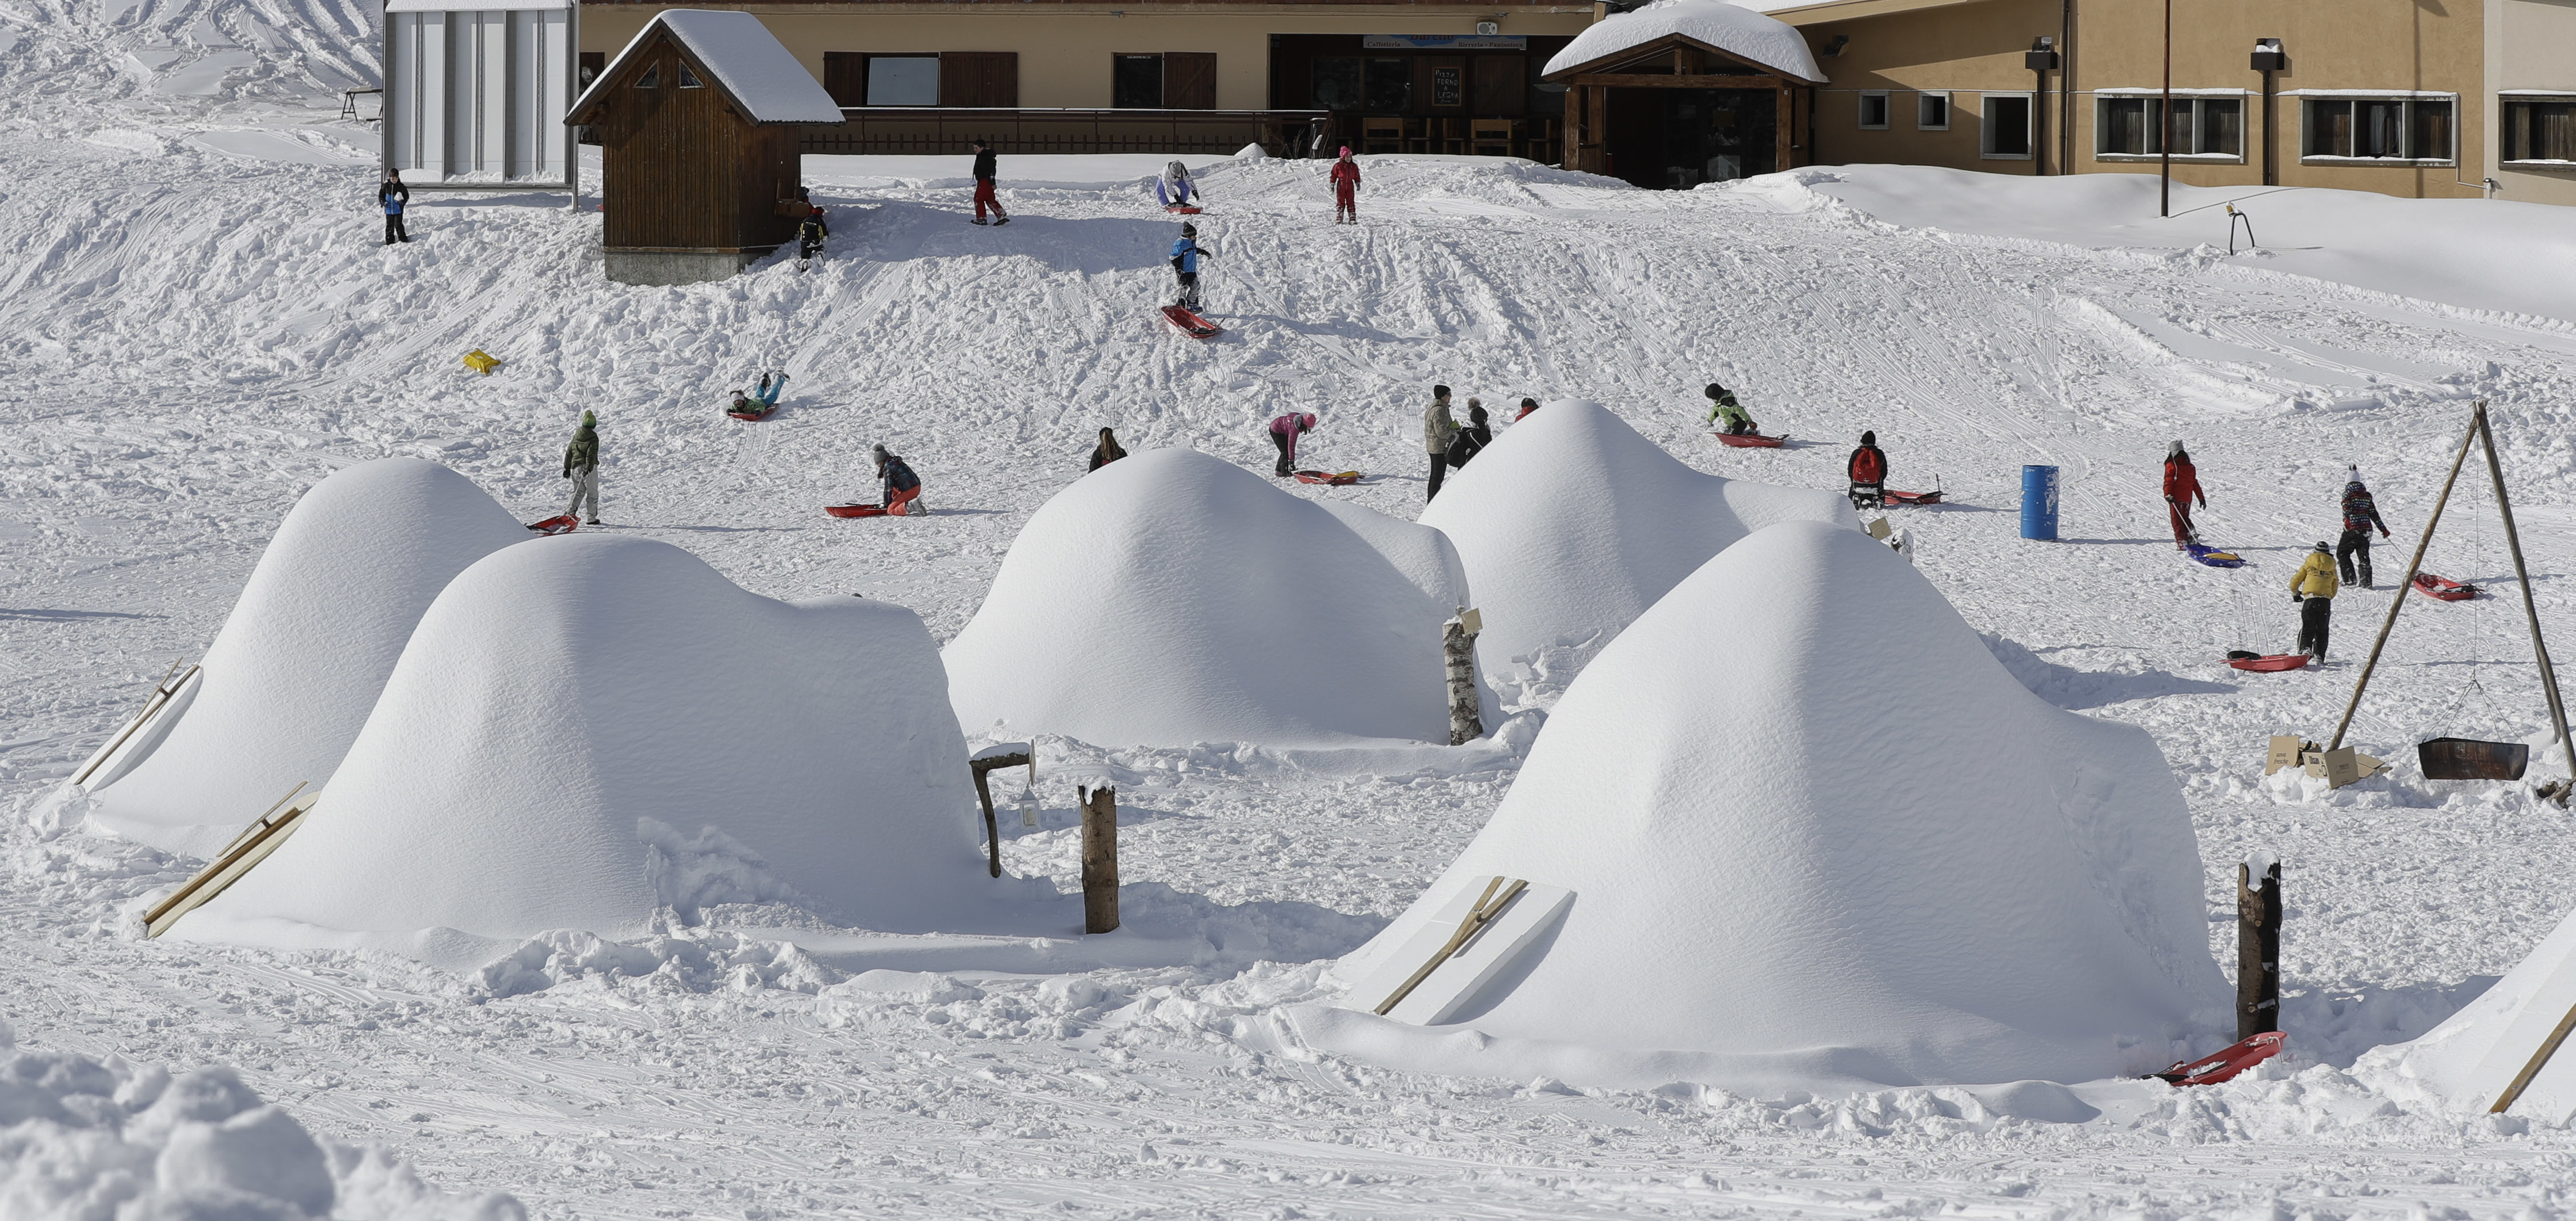 Children play with sledges behind an igloo village (Luca Bruno/AP)